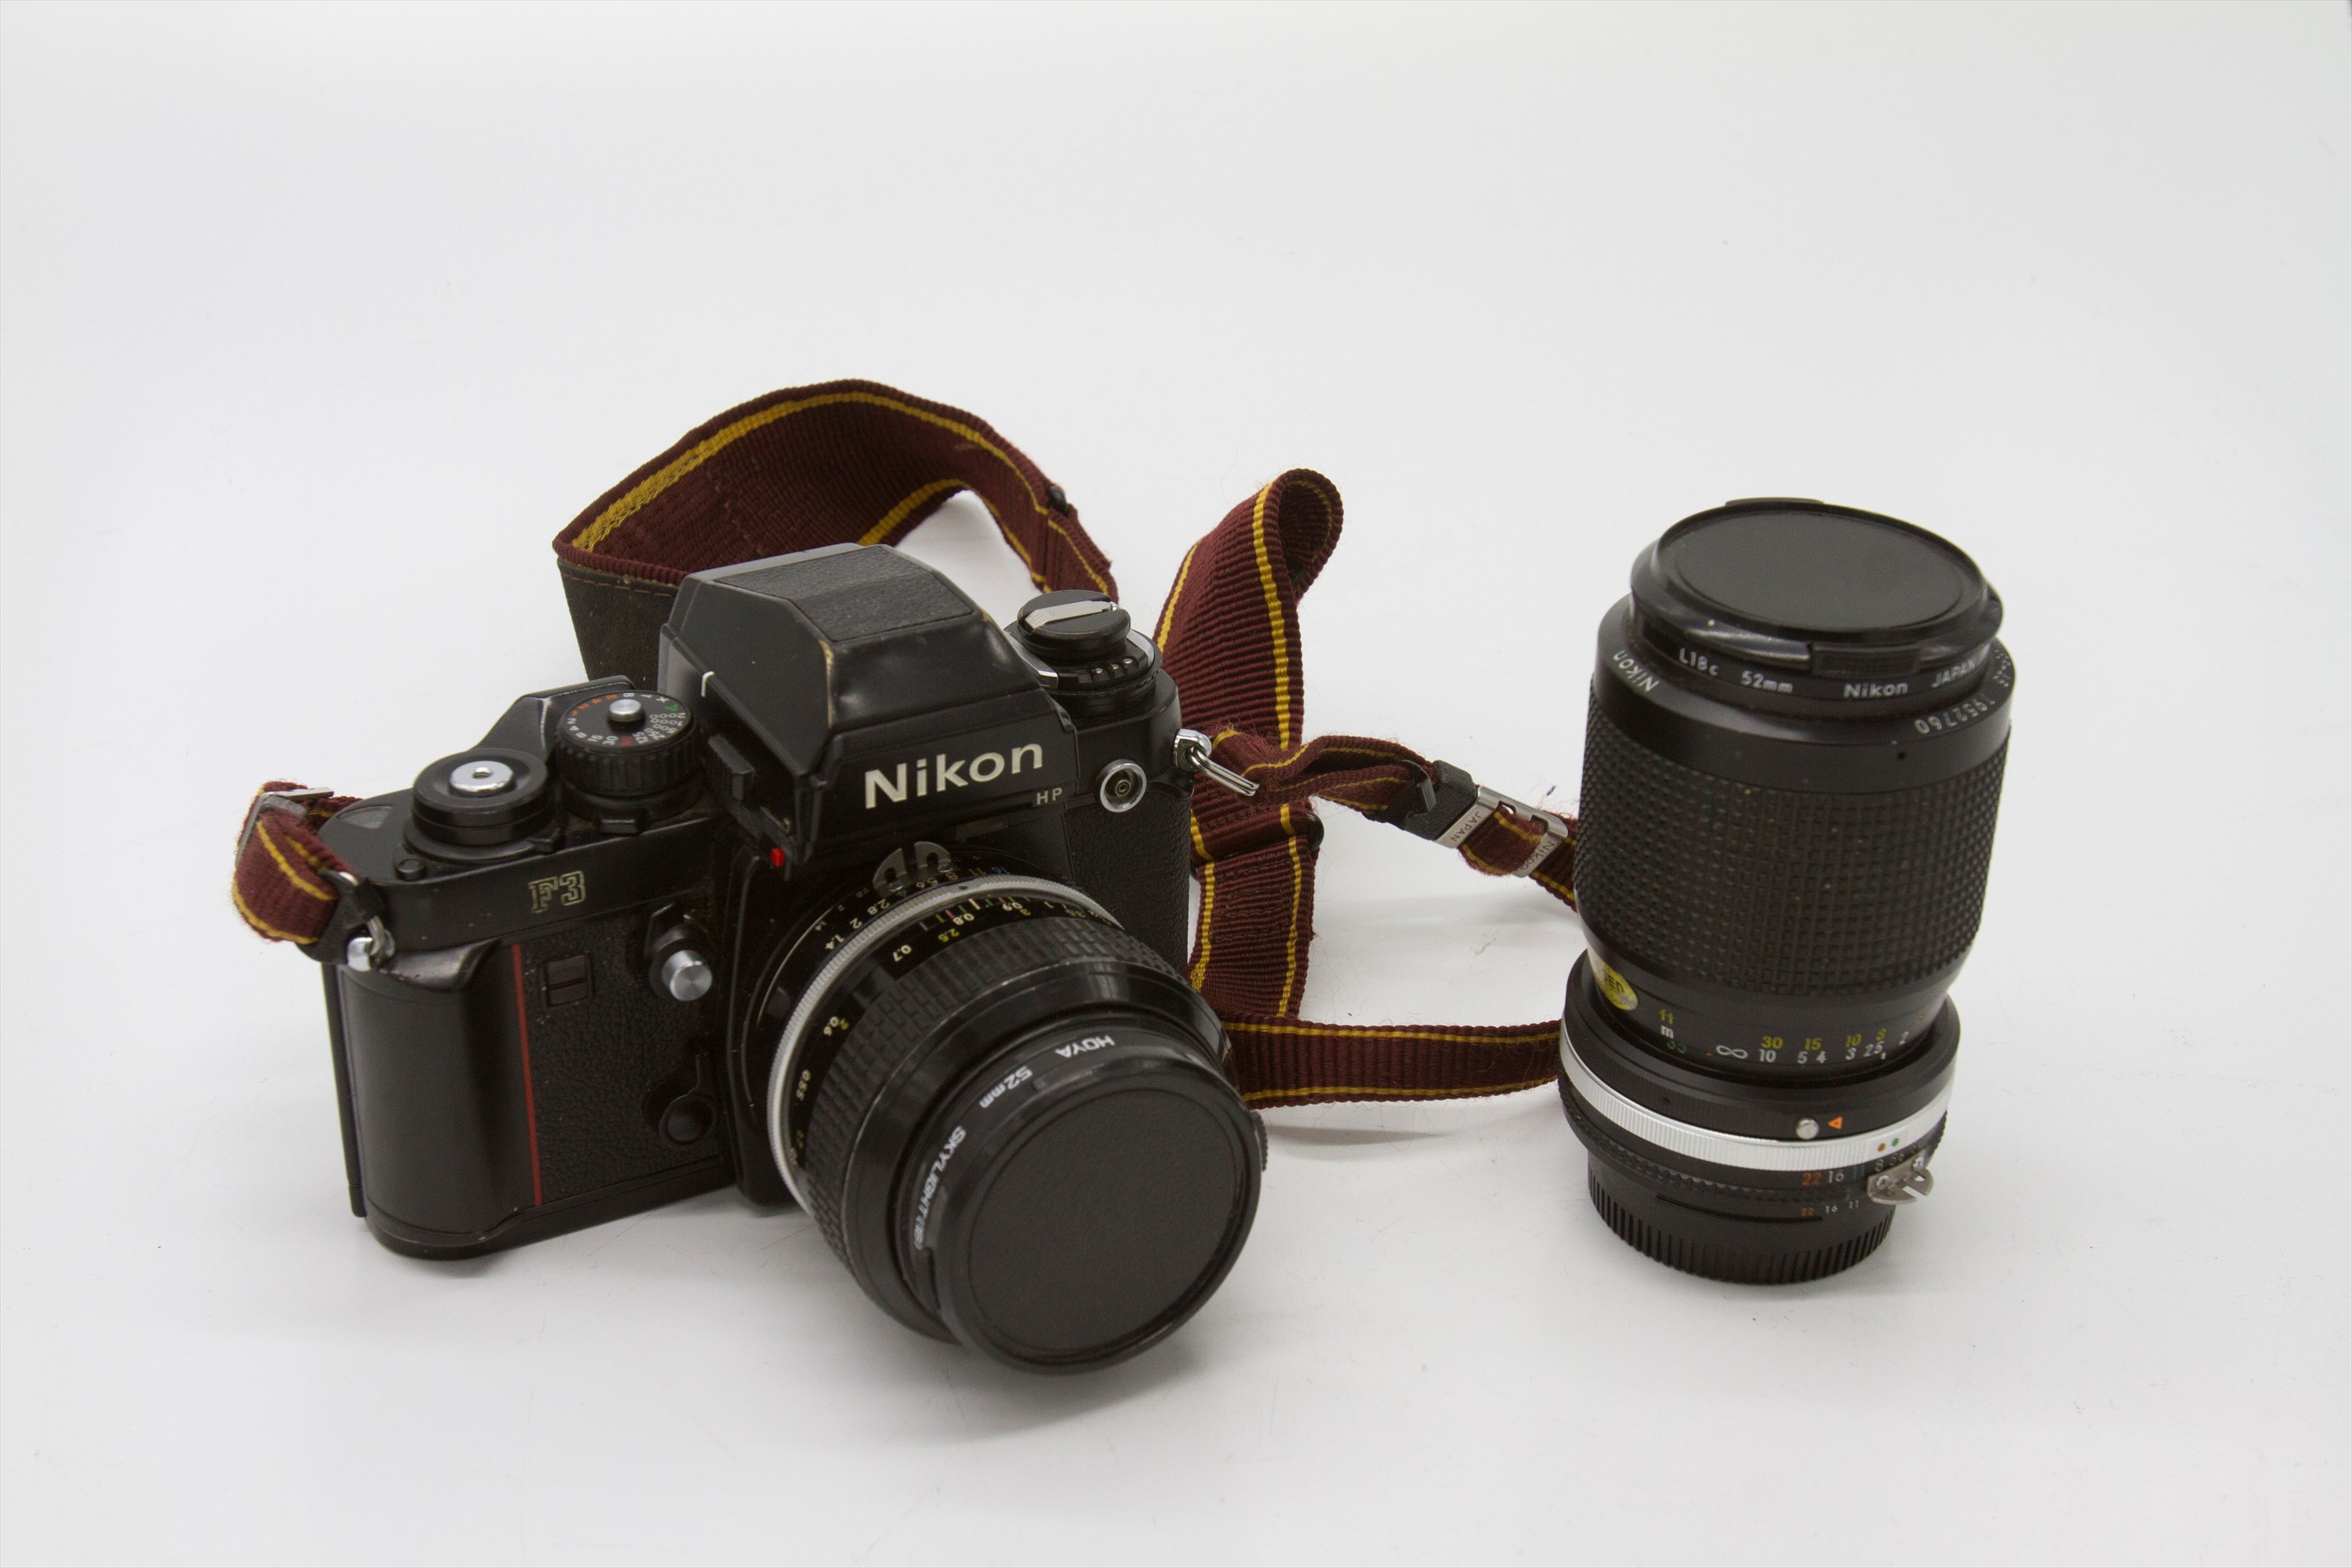 A Nikon F3 SLR camera, with two lenses, various filters, documentation and carrying case. - Image 2 of 2